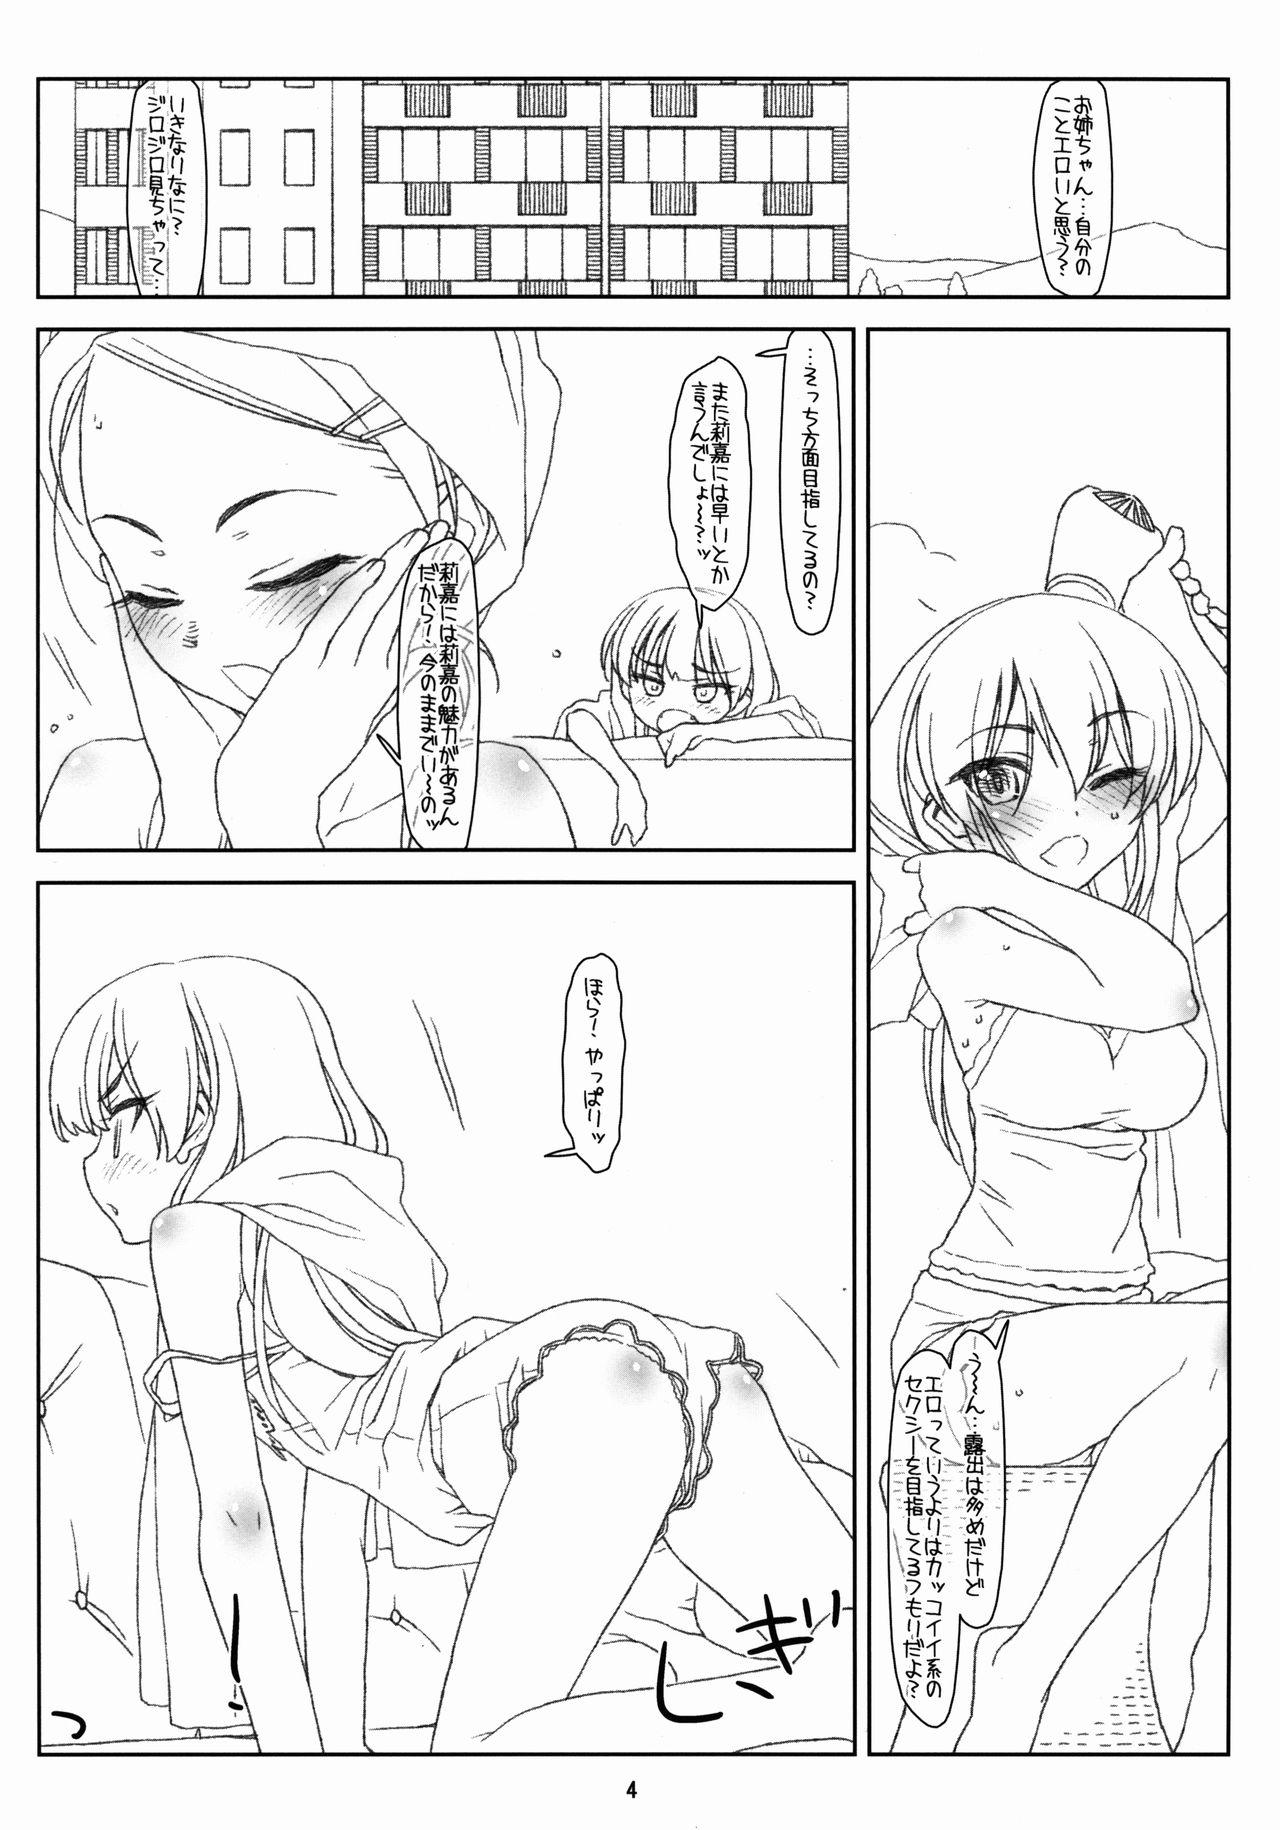 Russia White Star - The idolmaster Doggystyle - Page 4